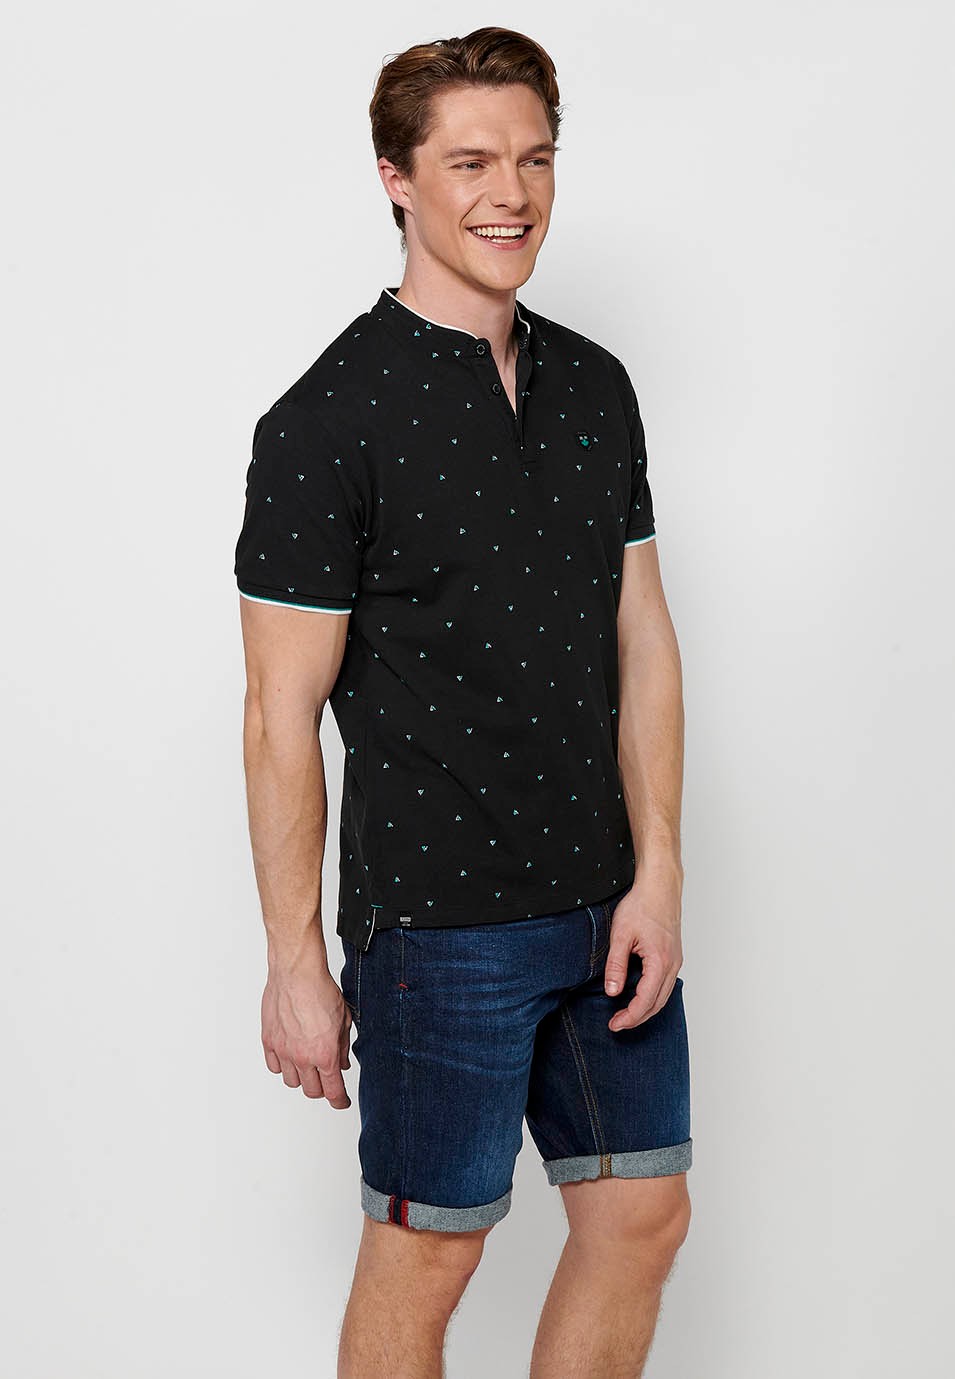 Short-sleeved Cotton Polo with Round Neck with buttoned opening and Finished with Side Cuts in Black for Men 4